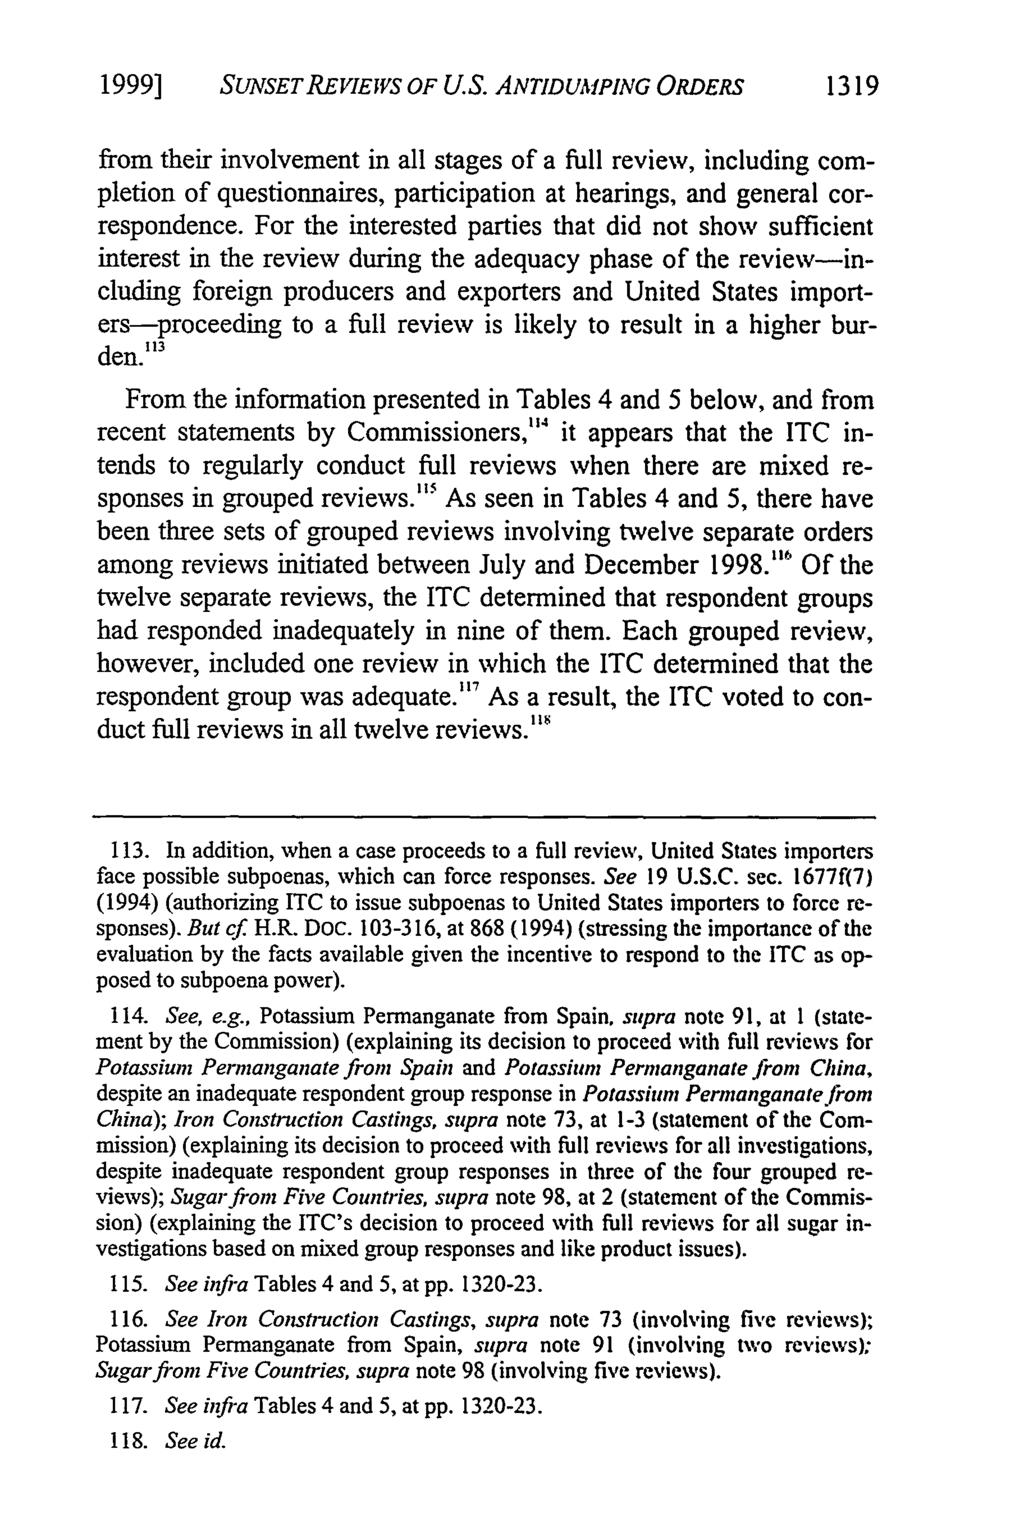 1999] SUNSETREVIEWS OF U.S. ANTIDUAIPNG ORDERS 1319 from their involvement in all stages of a full review, including completion of questionnaires, participation at hearings, and general correspondence.